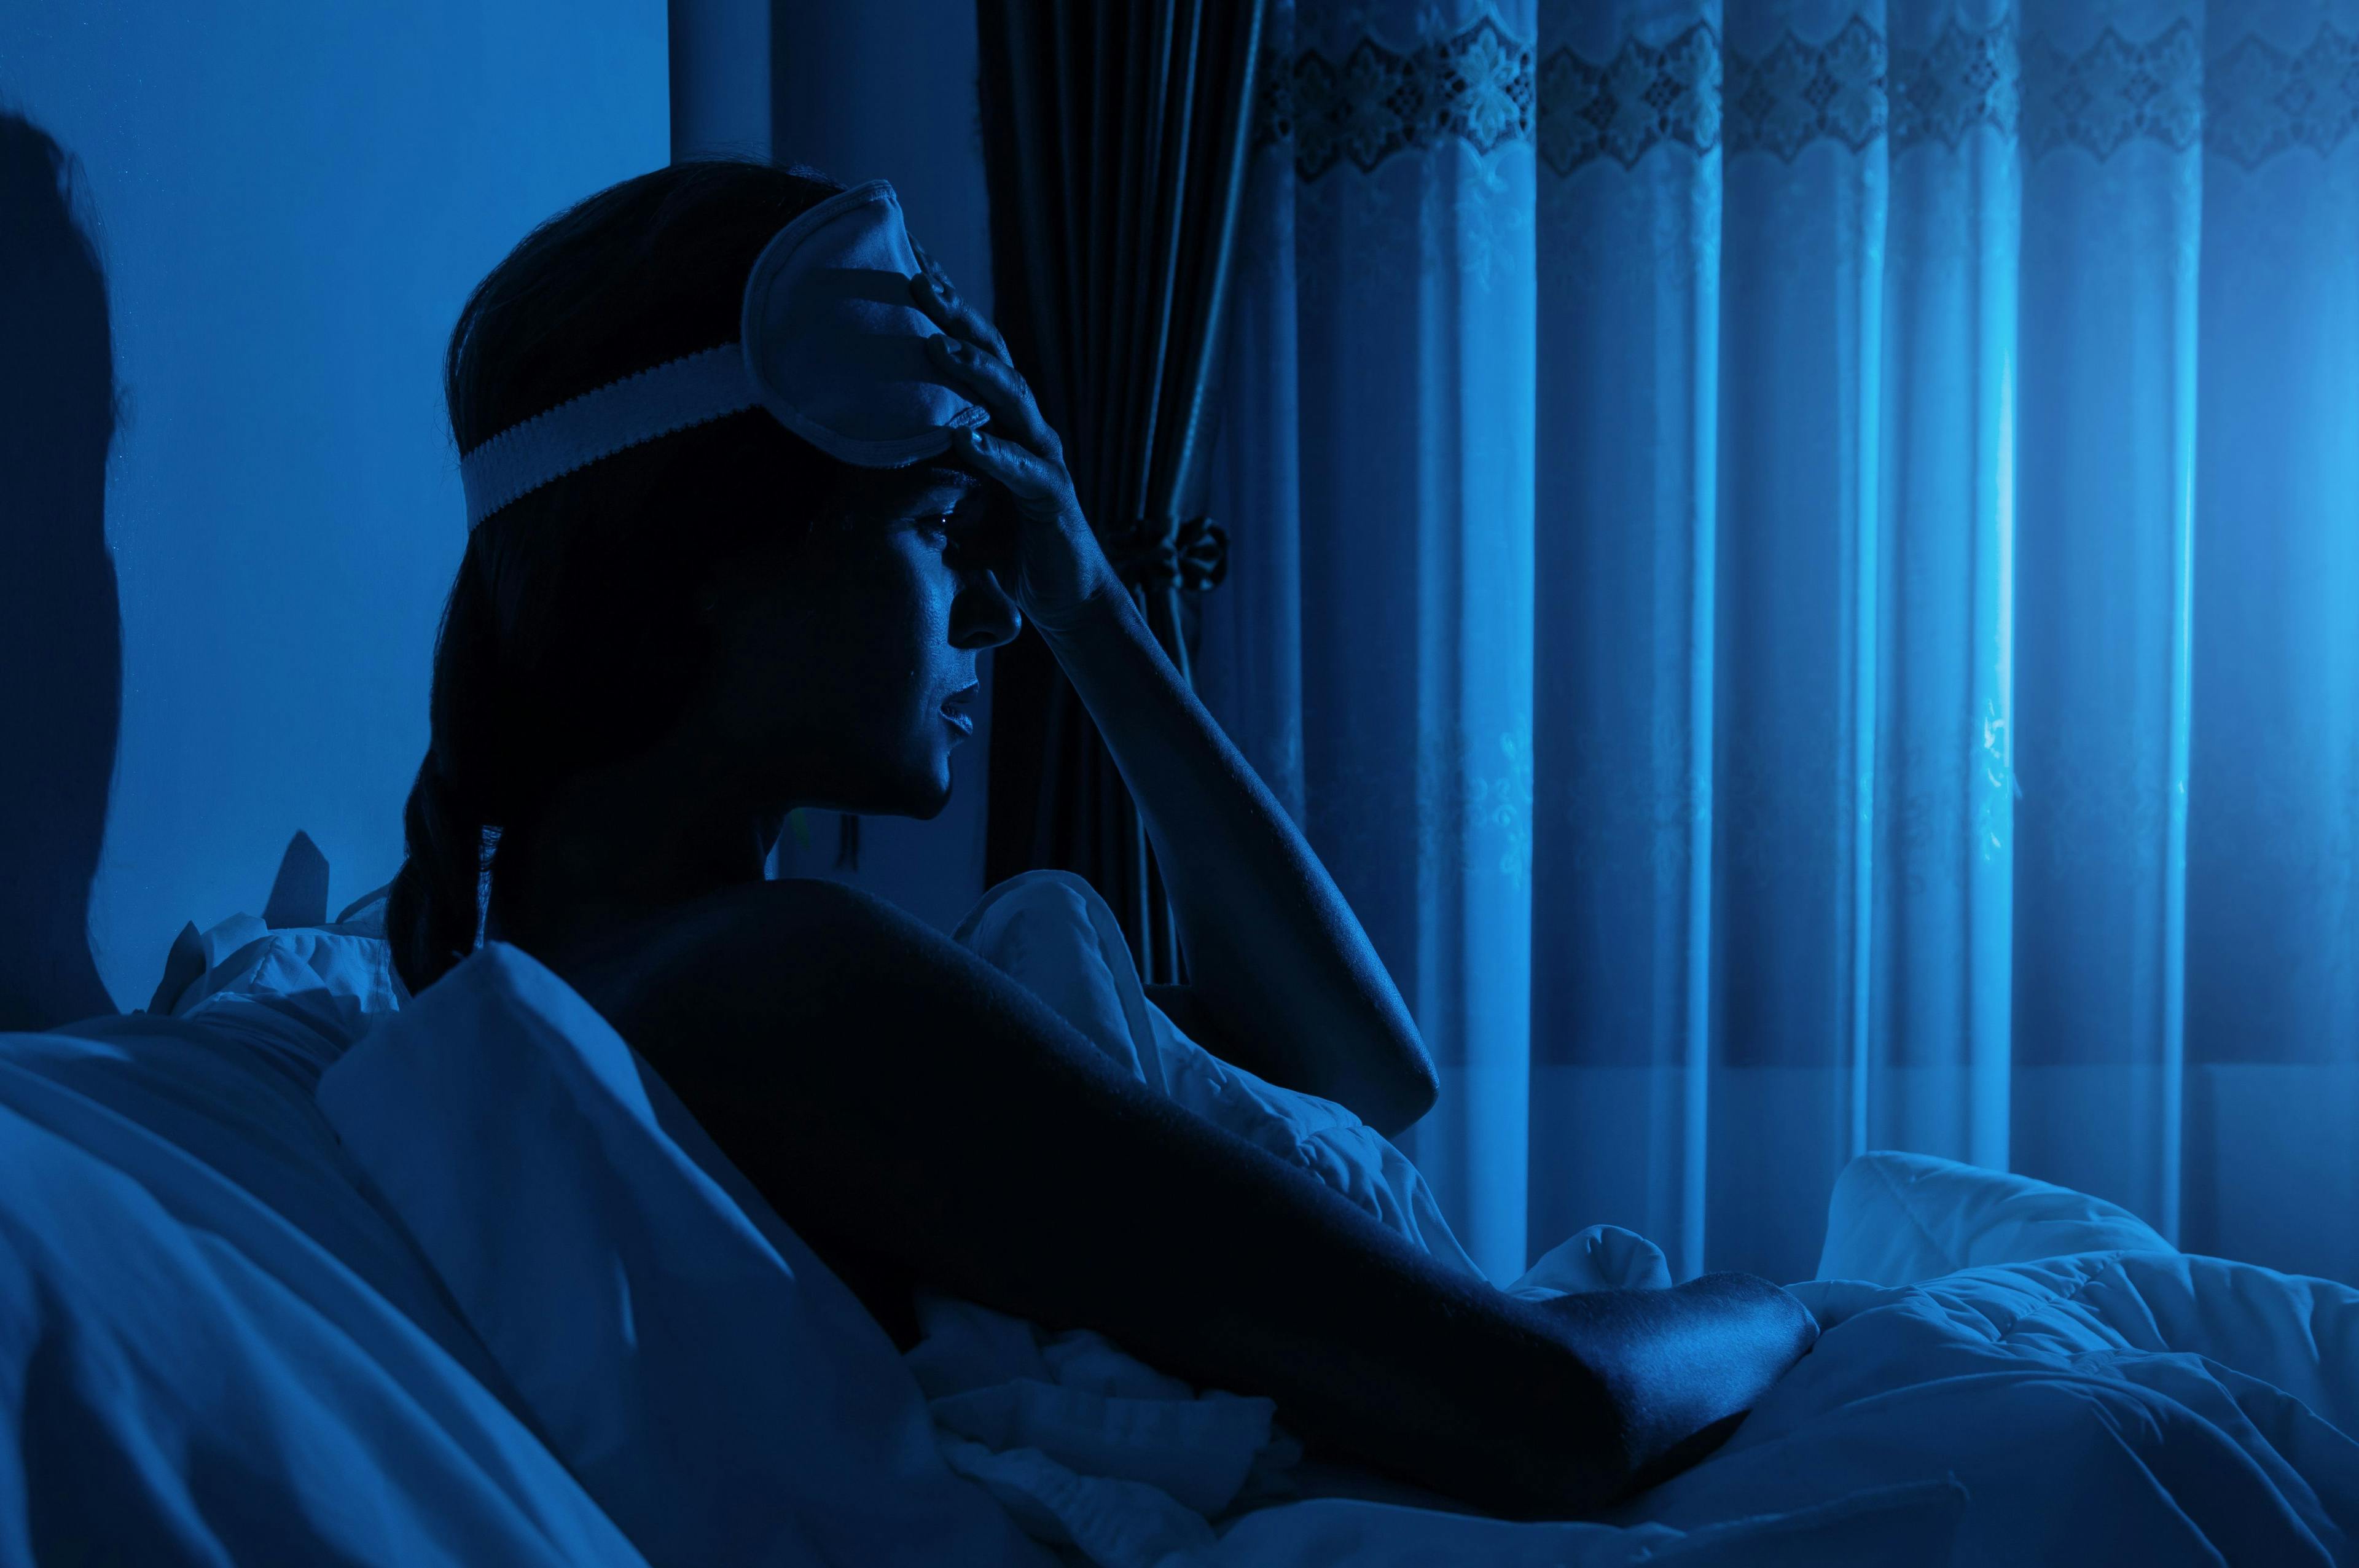 Does early improvement in insomnia predict response to pharmacotherapy in psychotic depression? Authors performed a secondary analysis of a randomized clinical trial.